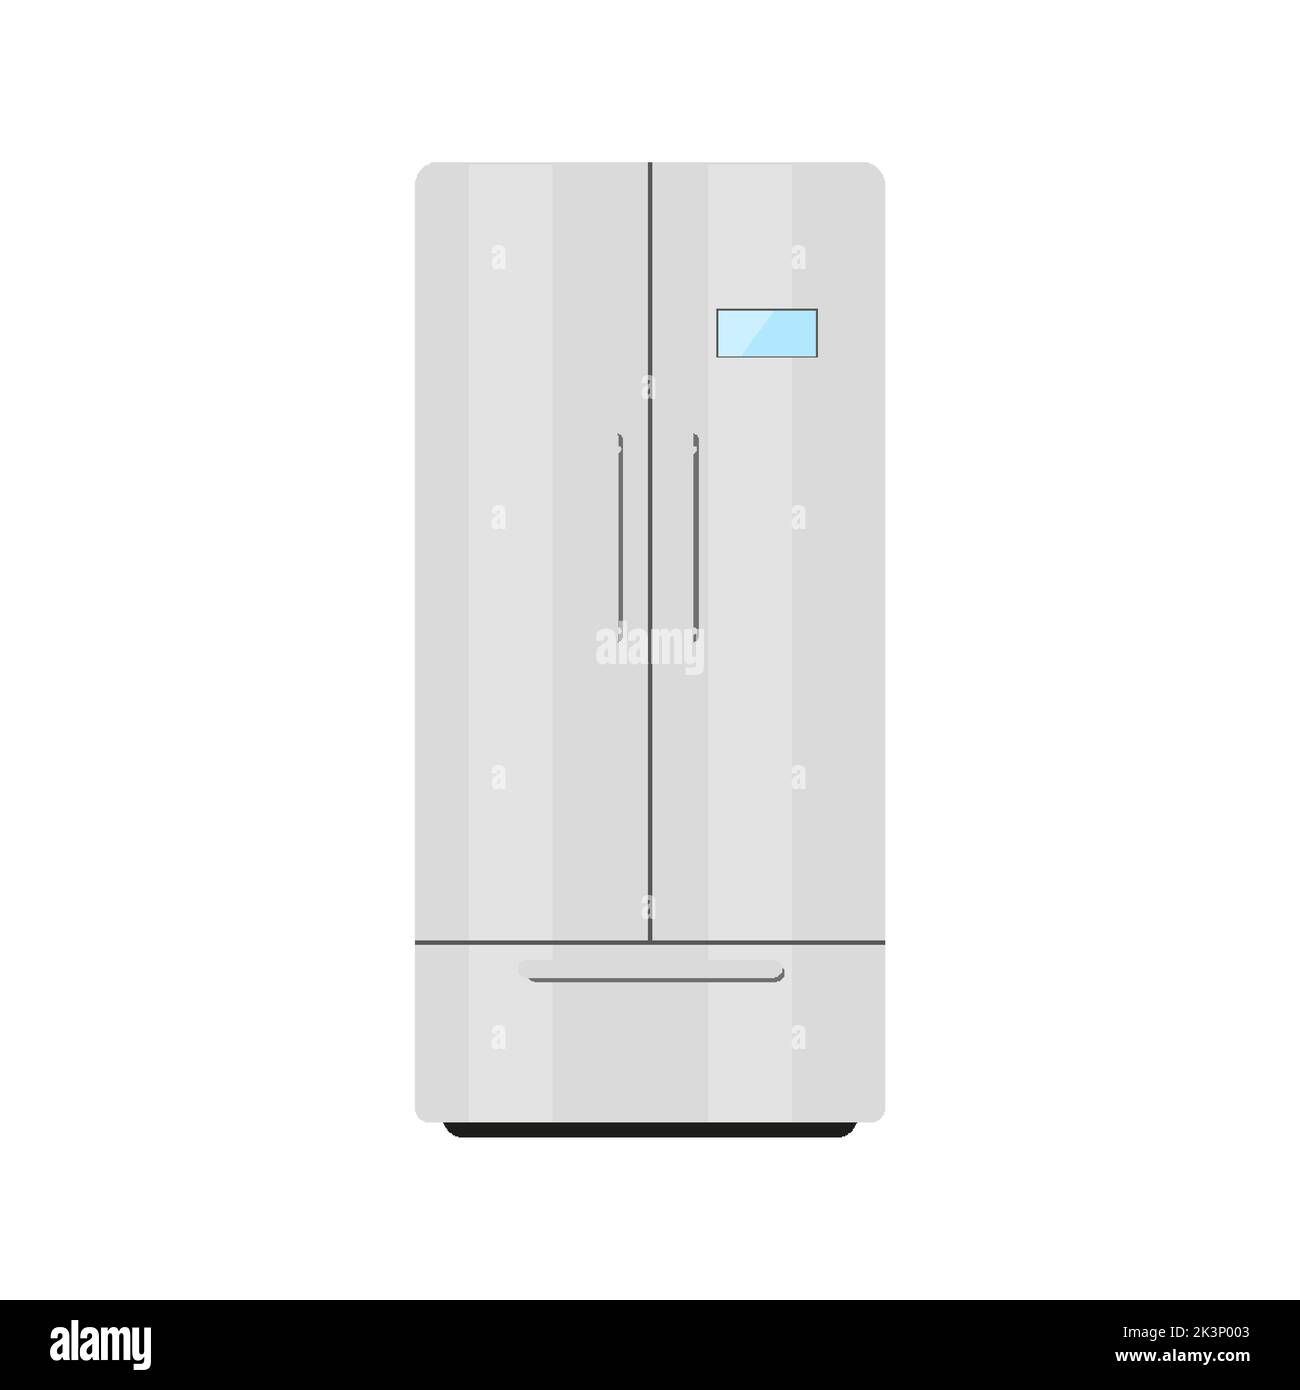 Refrigerator double leaf fridge kitchen white flat. Vertical icebox freezer food preservation fresh antibacterial self defrosting automatic no frost professional store food ready meal isolated Stock Vector